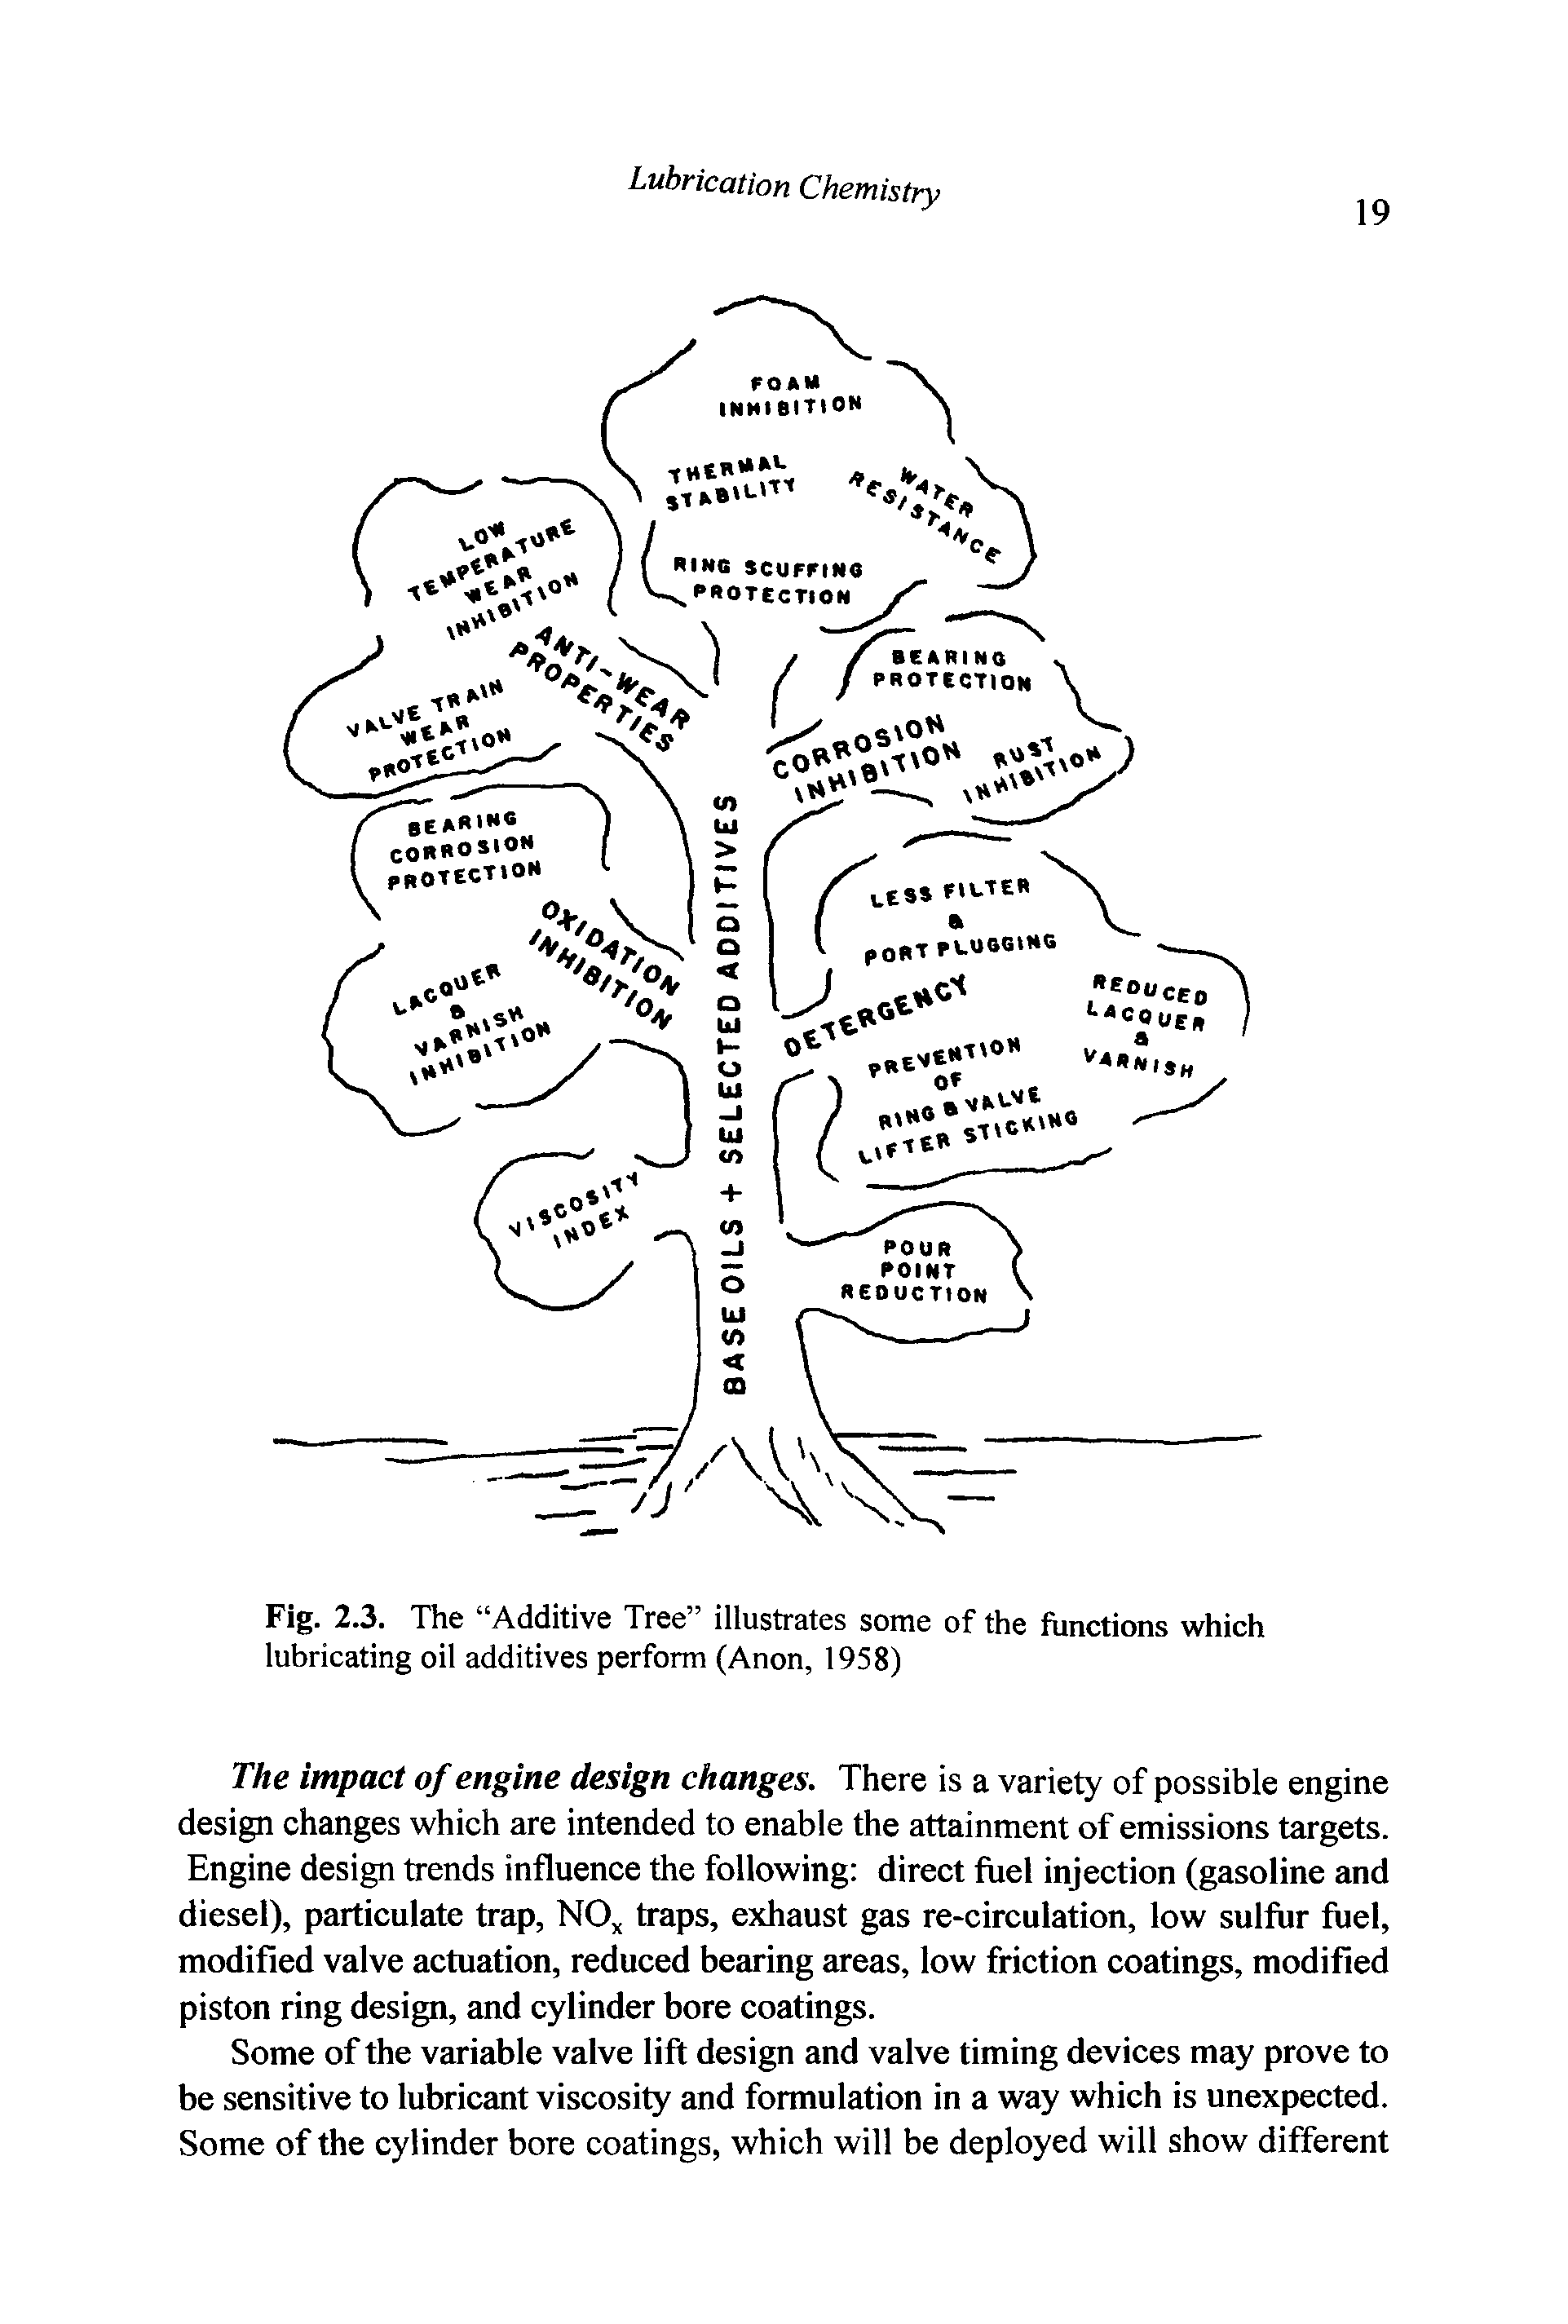 Fig. 2.3. The Additive Tree illustrates some of the functions which lubricating oil additives perform (Anon, 1958)...